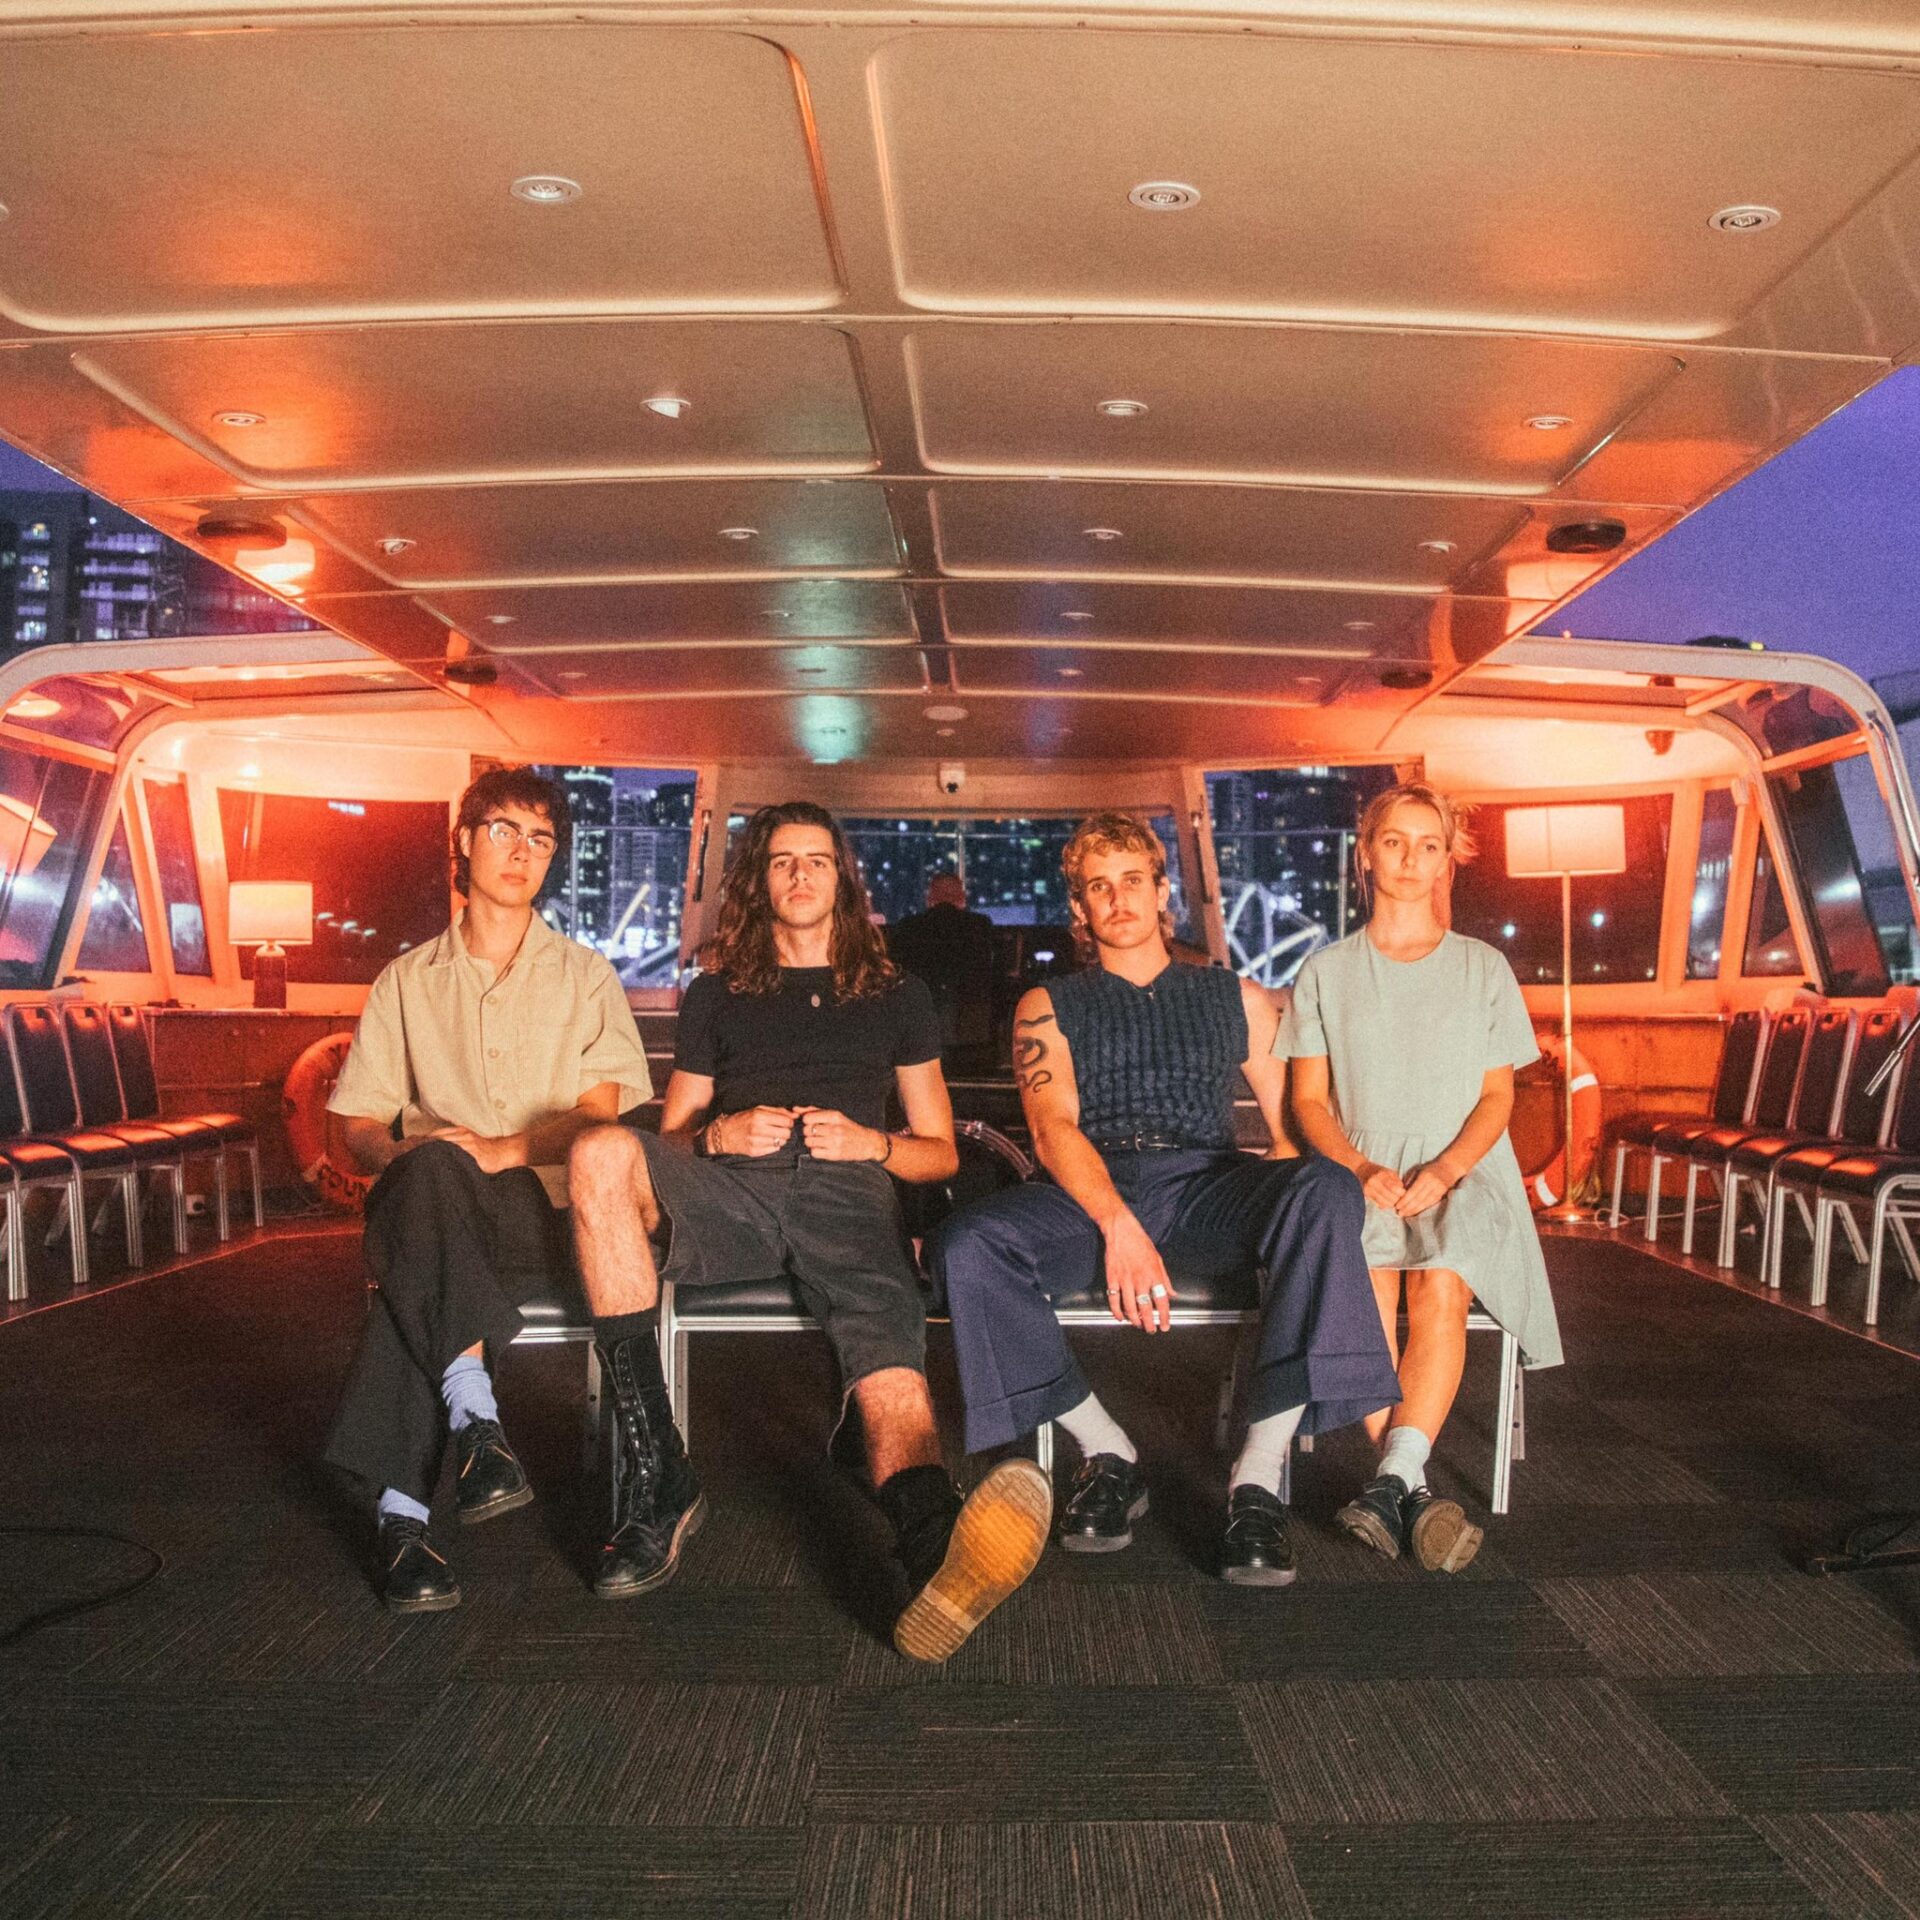 The four members of the band Spacey Jane seated on a ferry looking at the camera